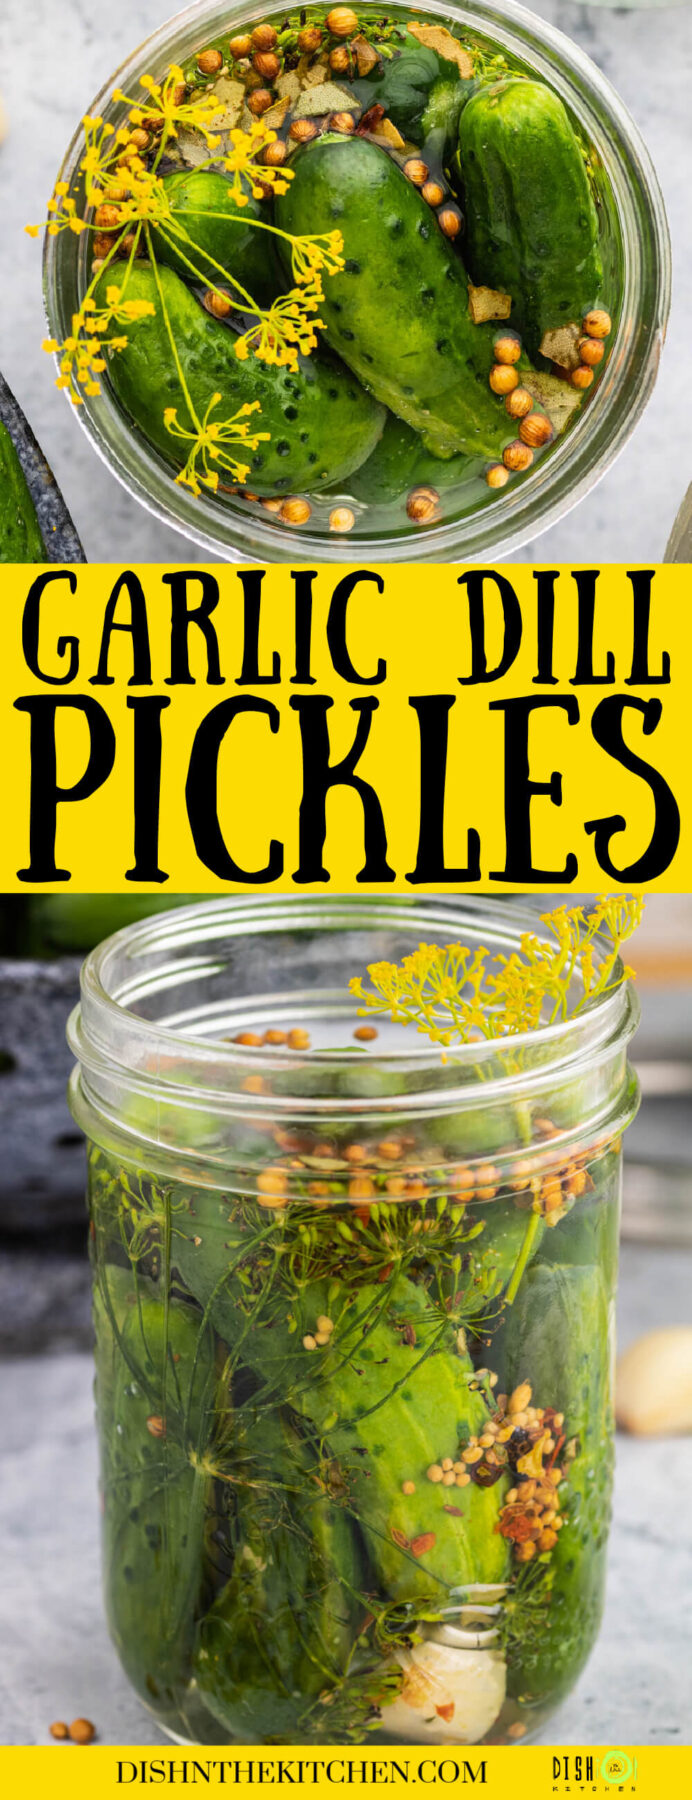 Pinterest image featuring pickles with dill and garlic in a jar.